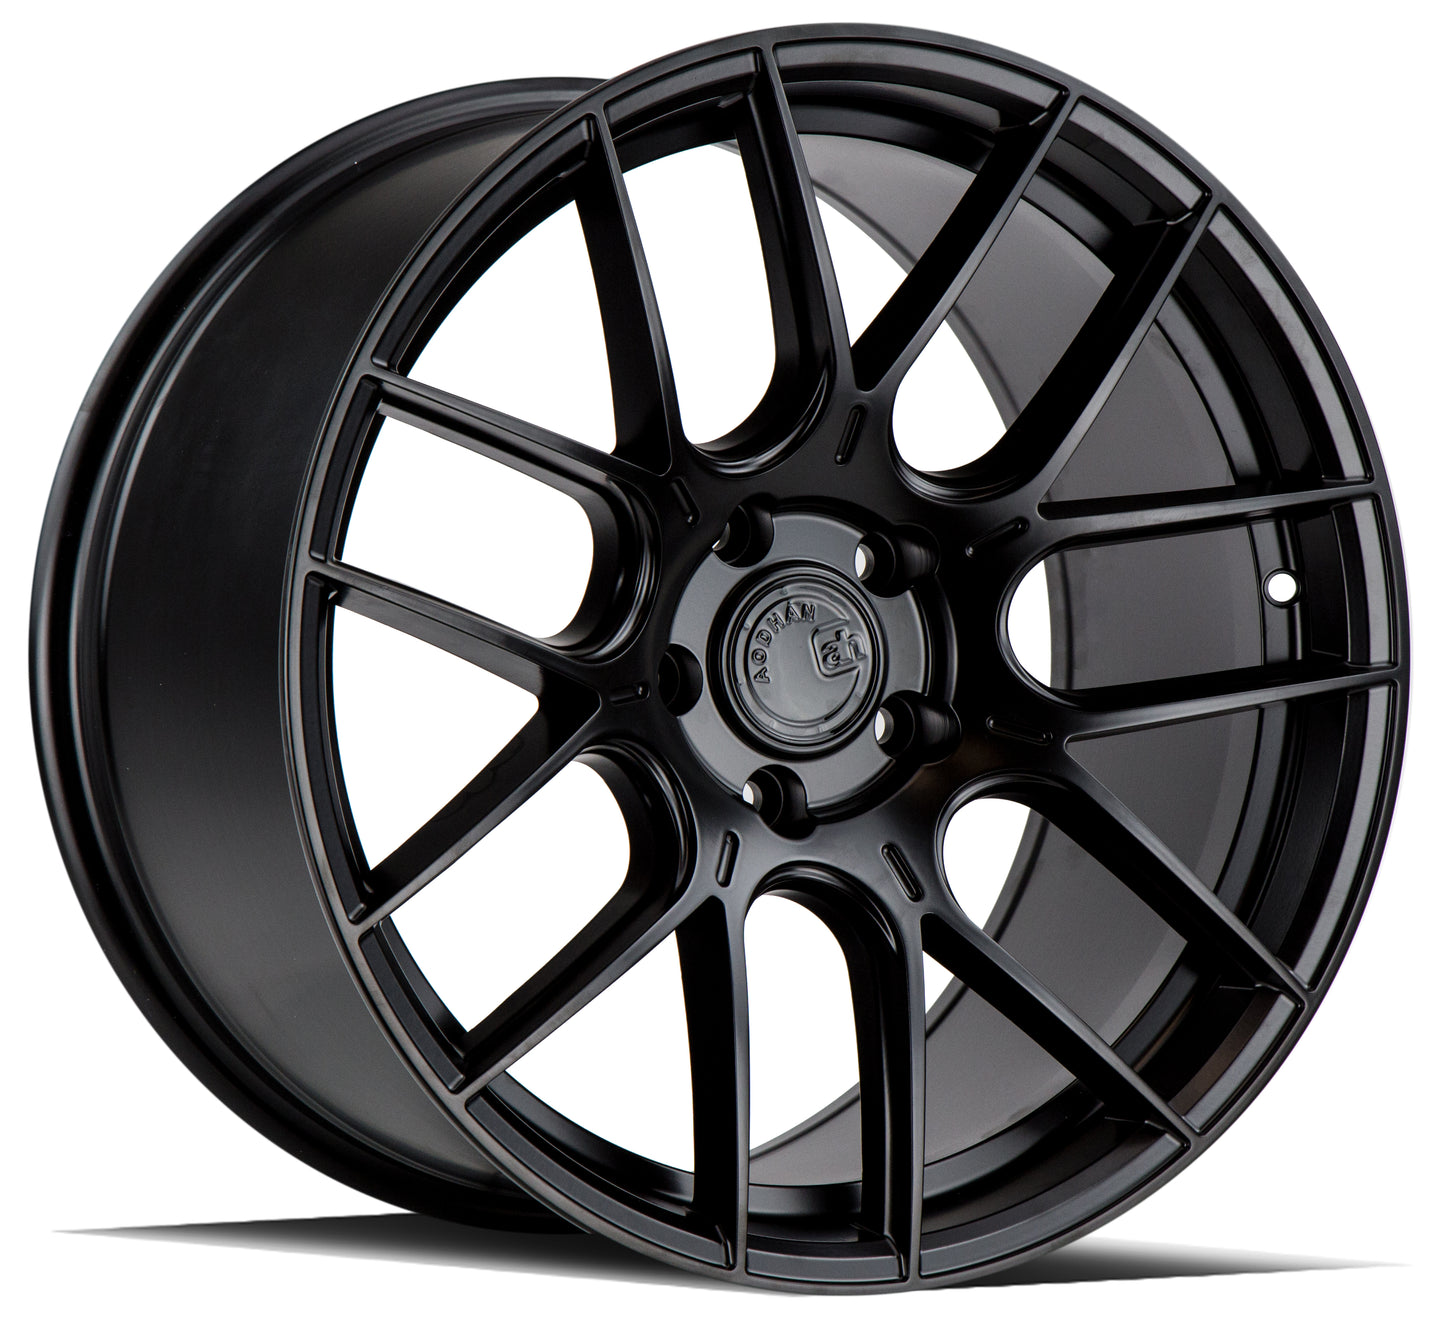 18" Aodhan AHX Matte Black 5x120 ( Staggered Setup ) ( Set of 4 )